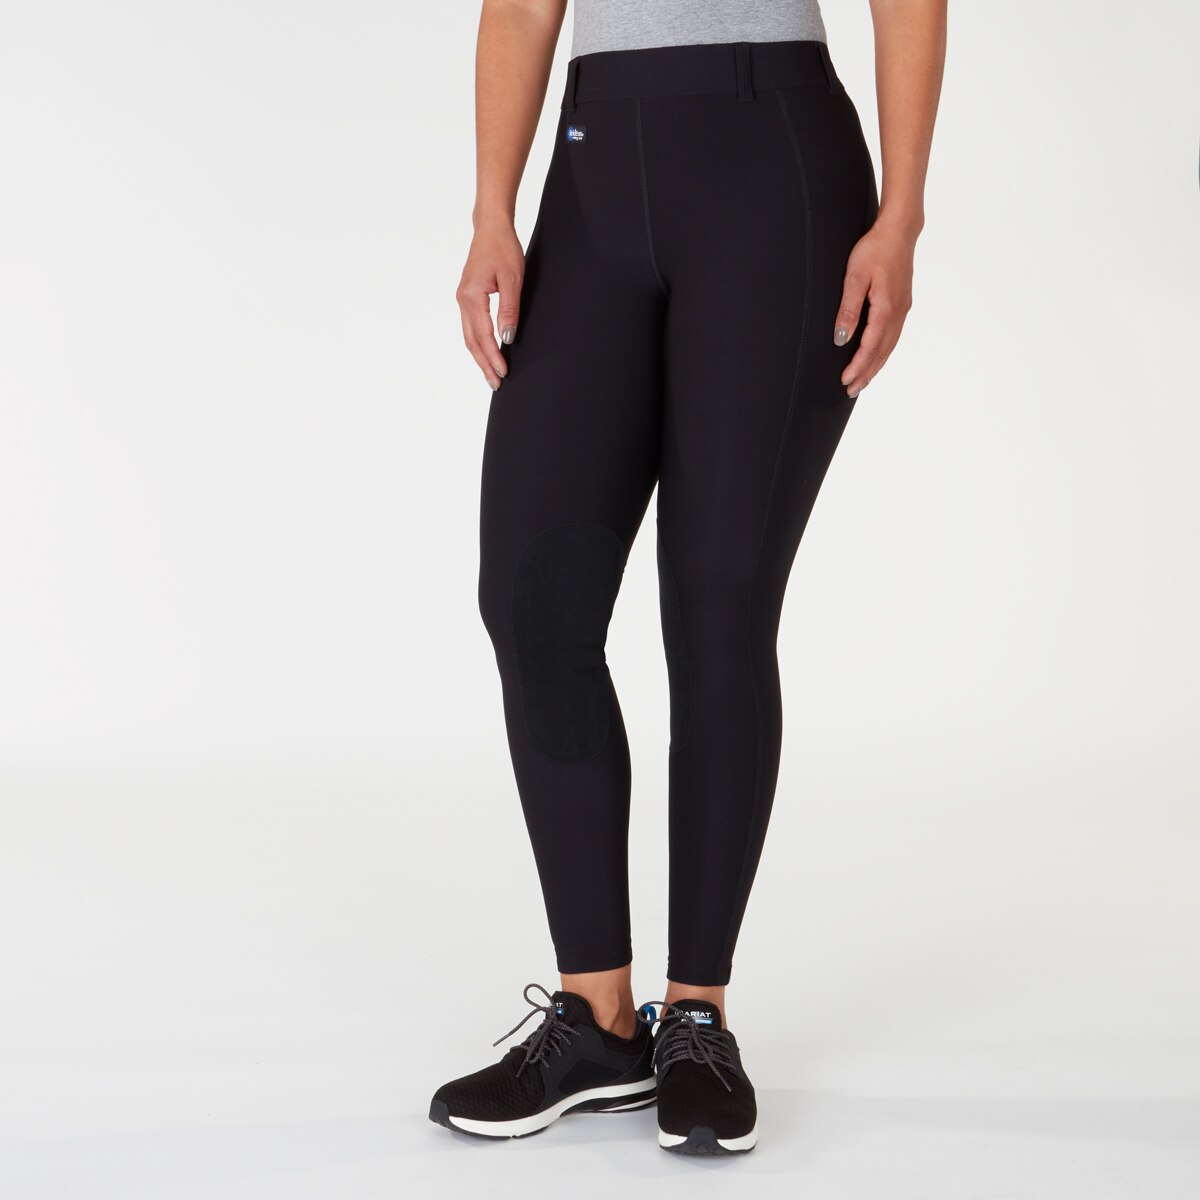 Irideon Issential Riding Tights